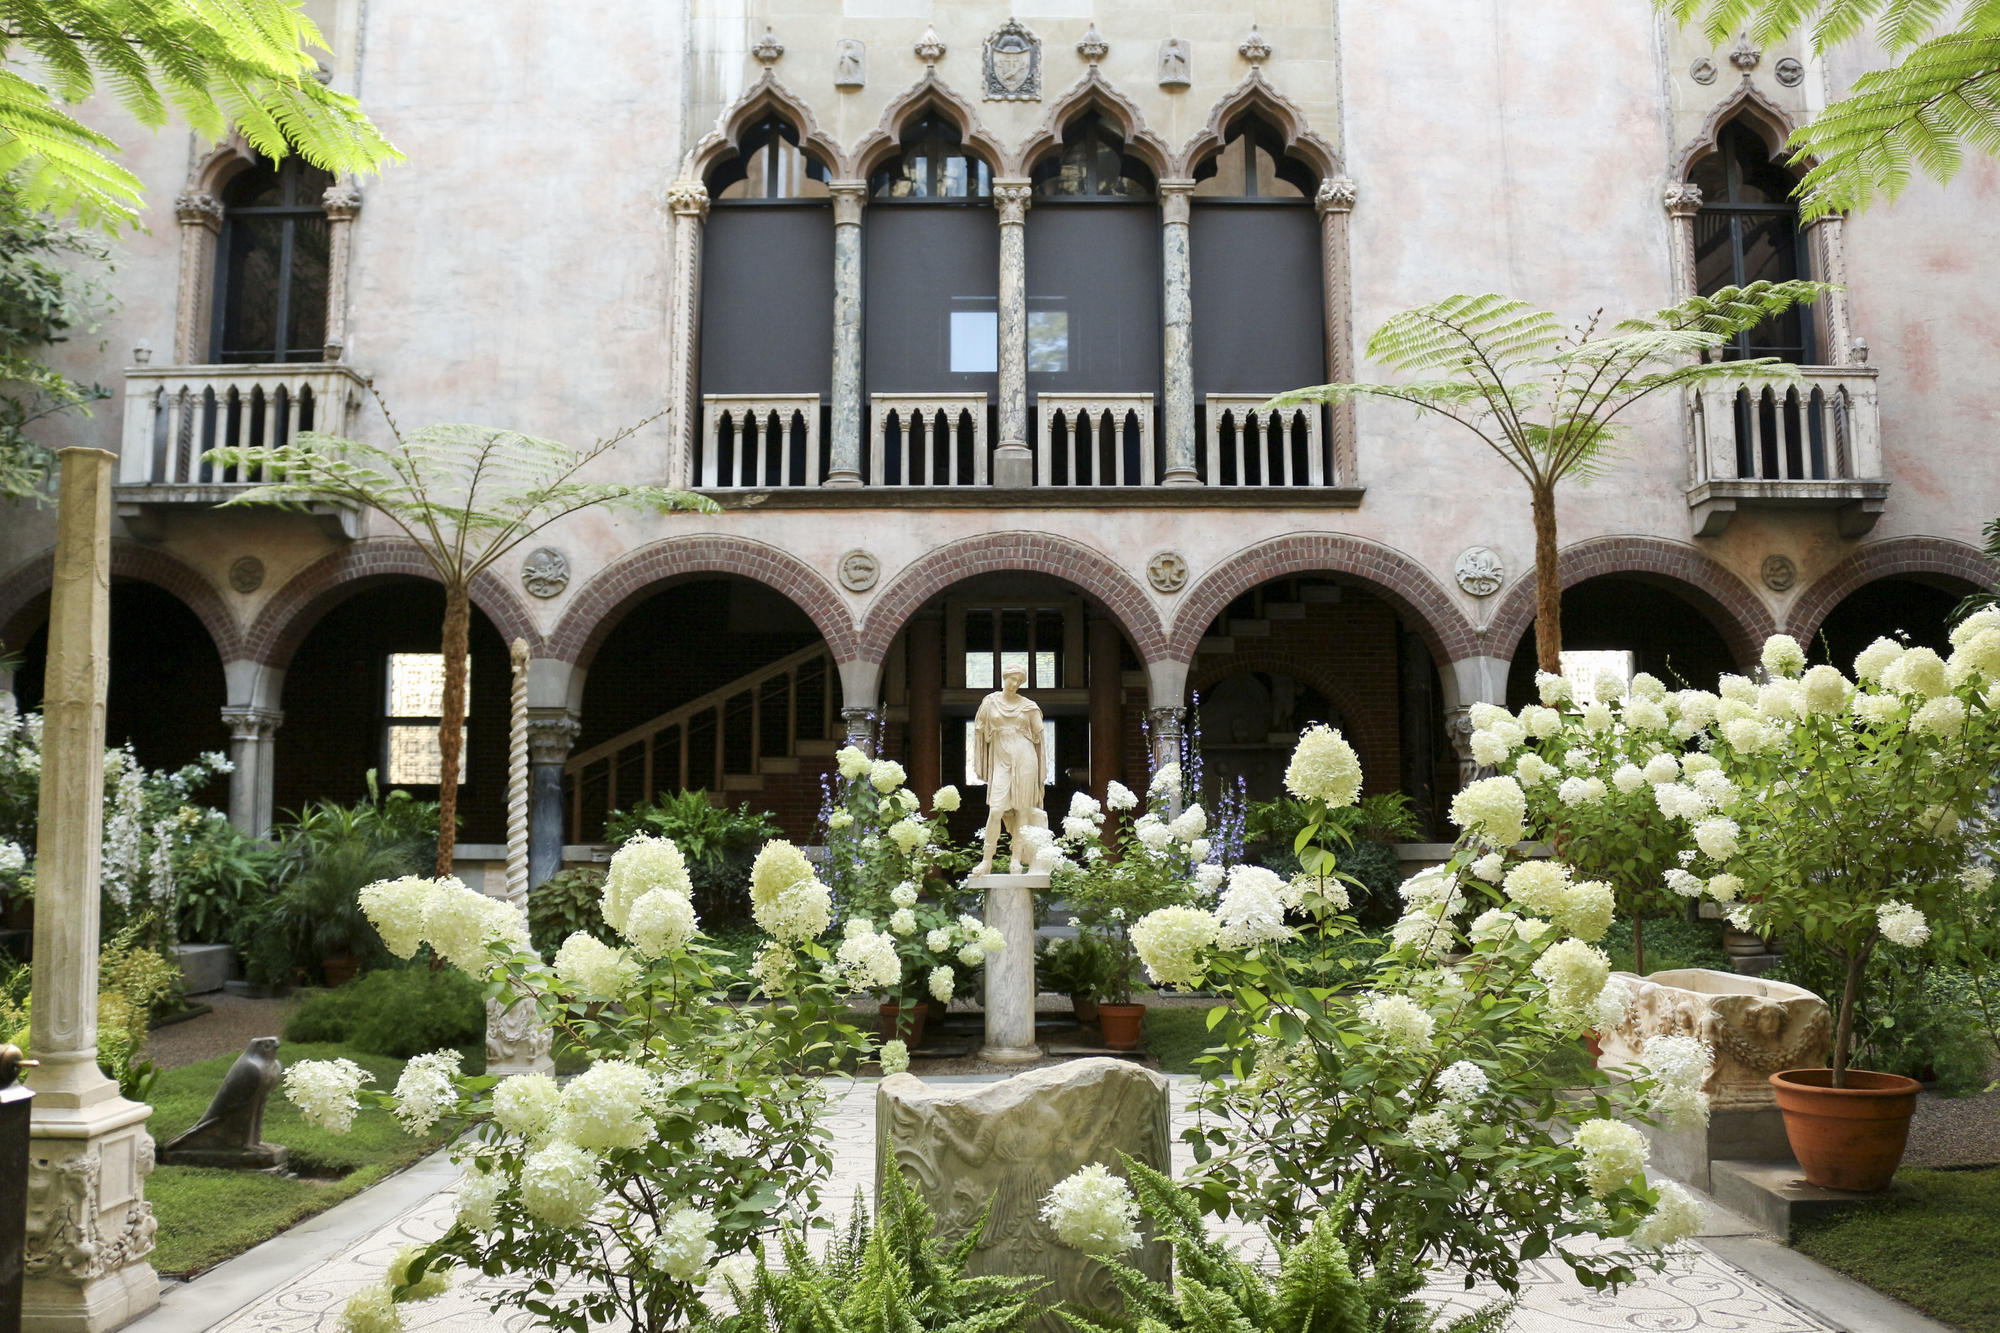 The Courtyard. Photo by Sarah Whitling.